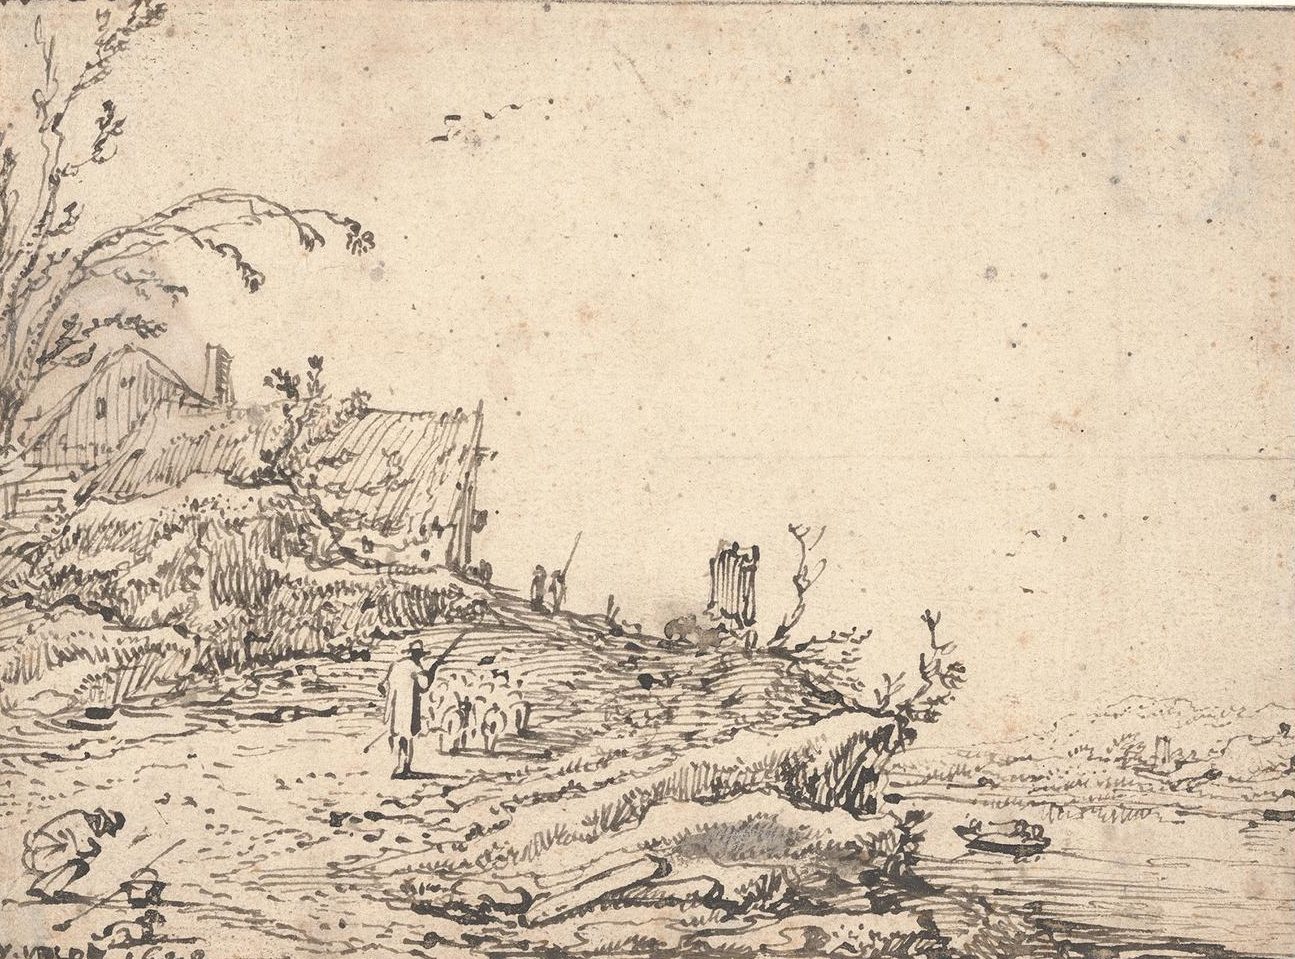 Drawing of a river landscape